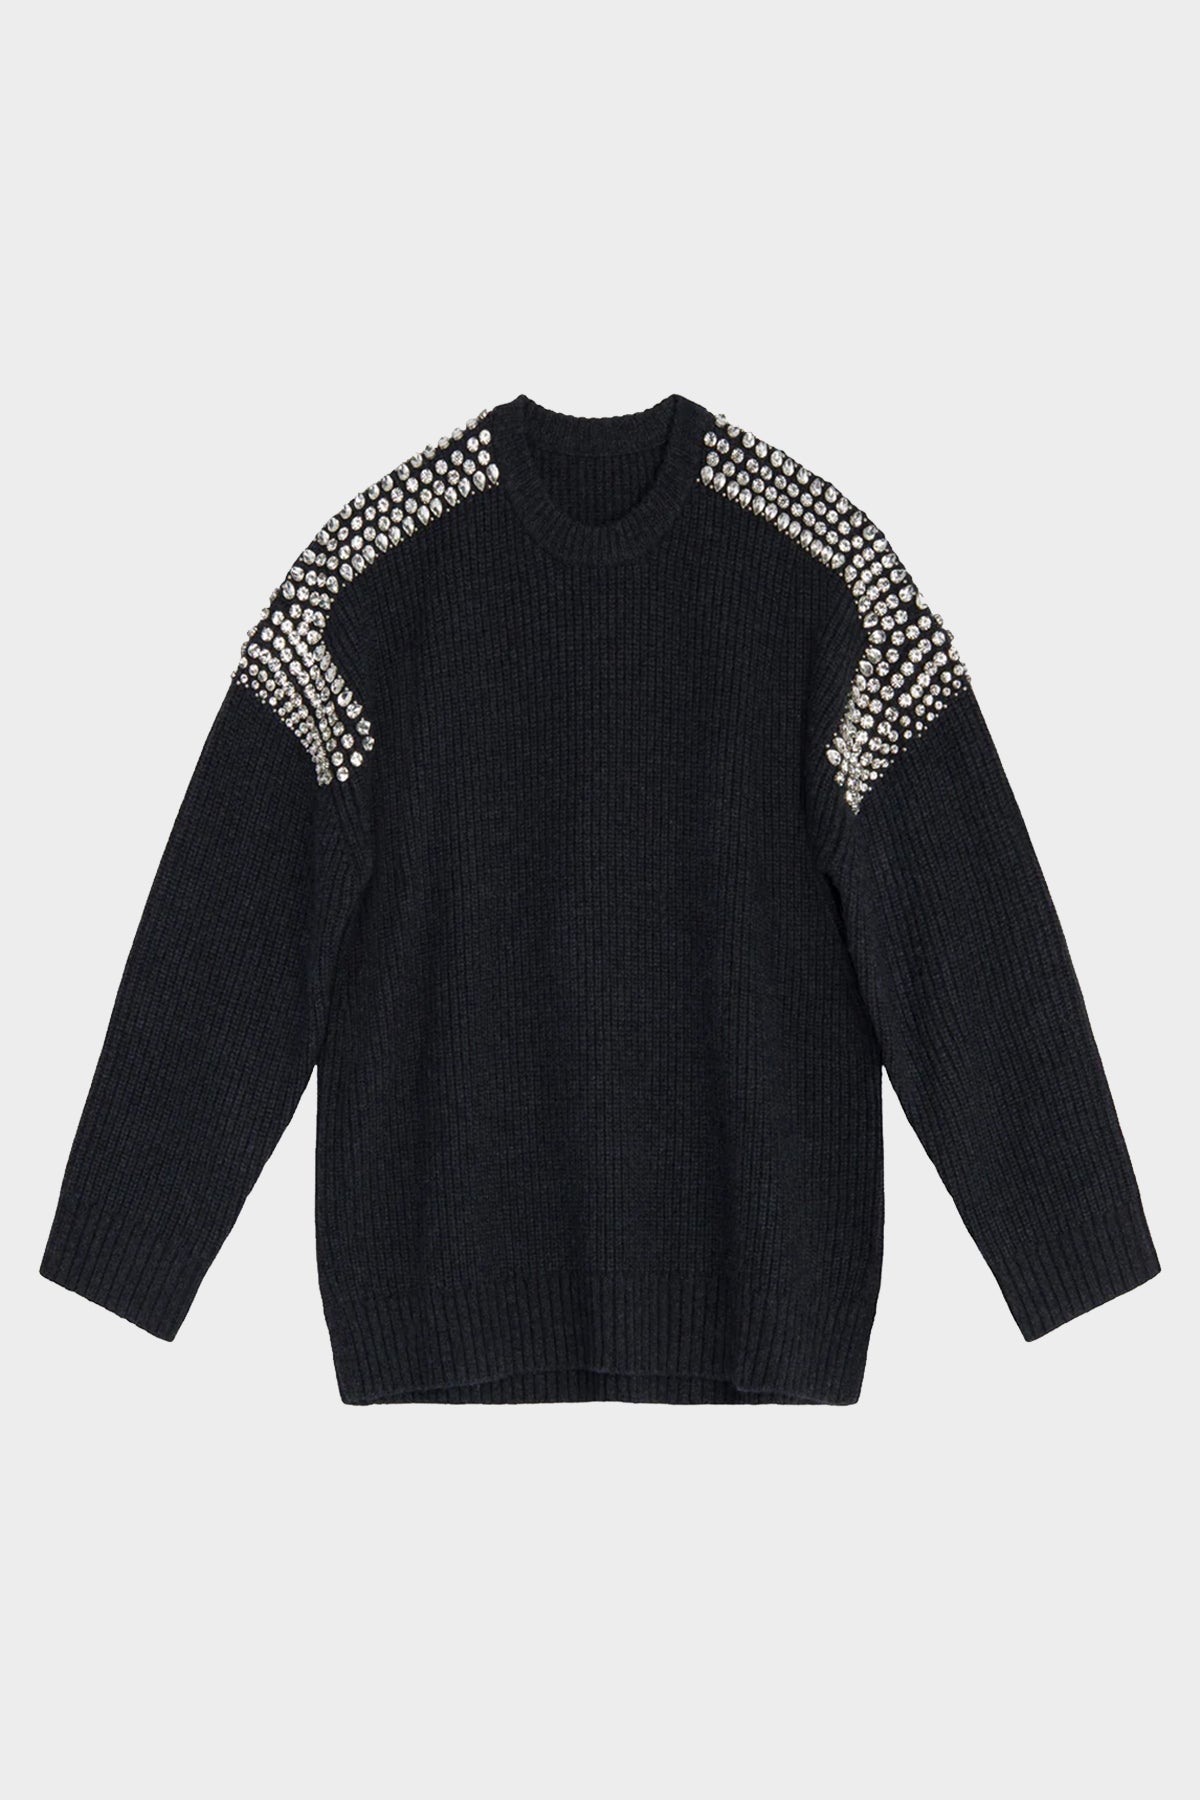 Colby Embellished Wool Sweater in Dark Heather Grey - shop-olivia.com